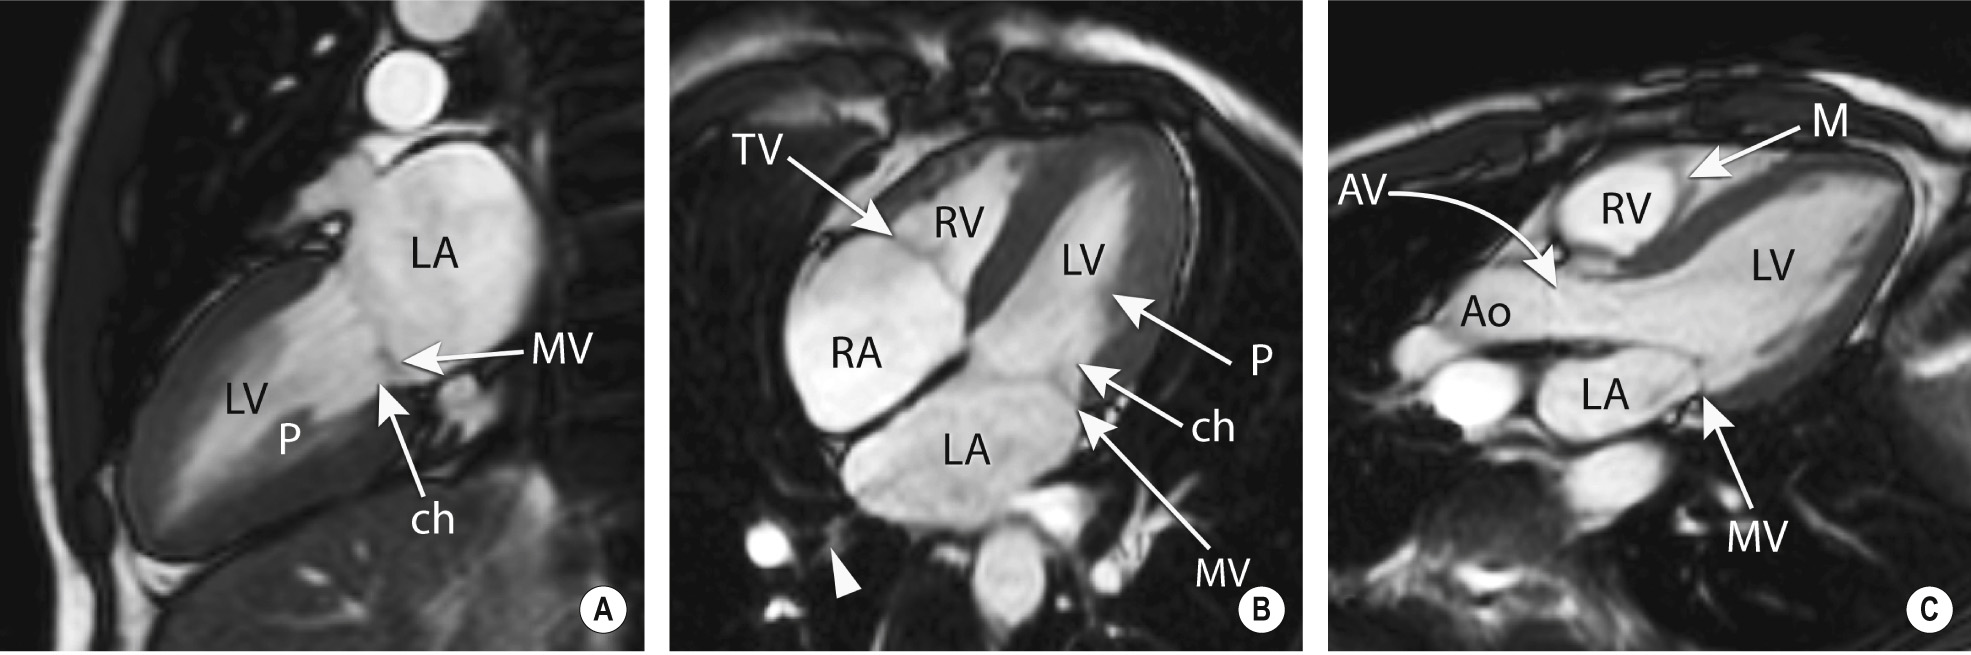 Normal cardiac anatomy on bright blood; two-, four- and three-chamber views. RA, right atrium; LA, left atrium; RV, right ventricle; LV, left ventricle; P, papillary muscle; TV, tricuspid valve; MV, mitral valve; AV, aortic valve; Ao, aorta; M, moderator band; ch, chordae tendineae. **